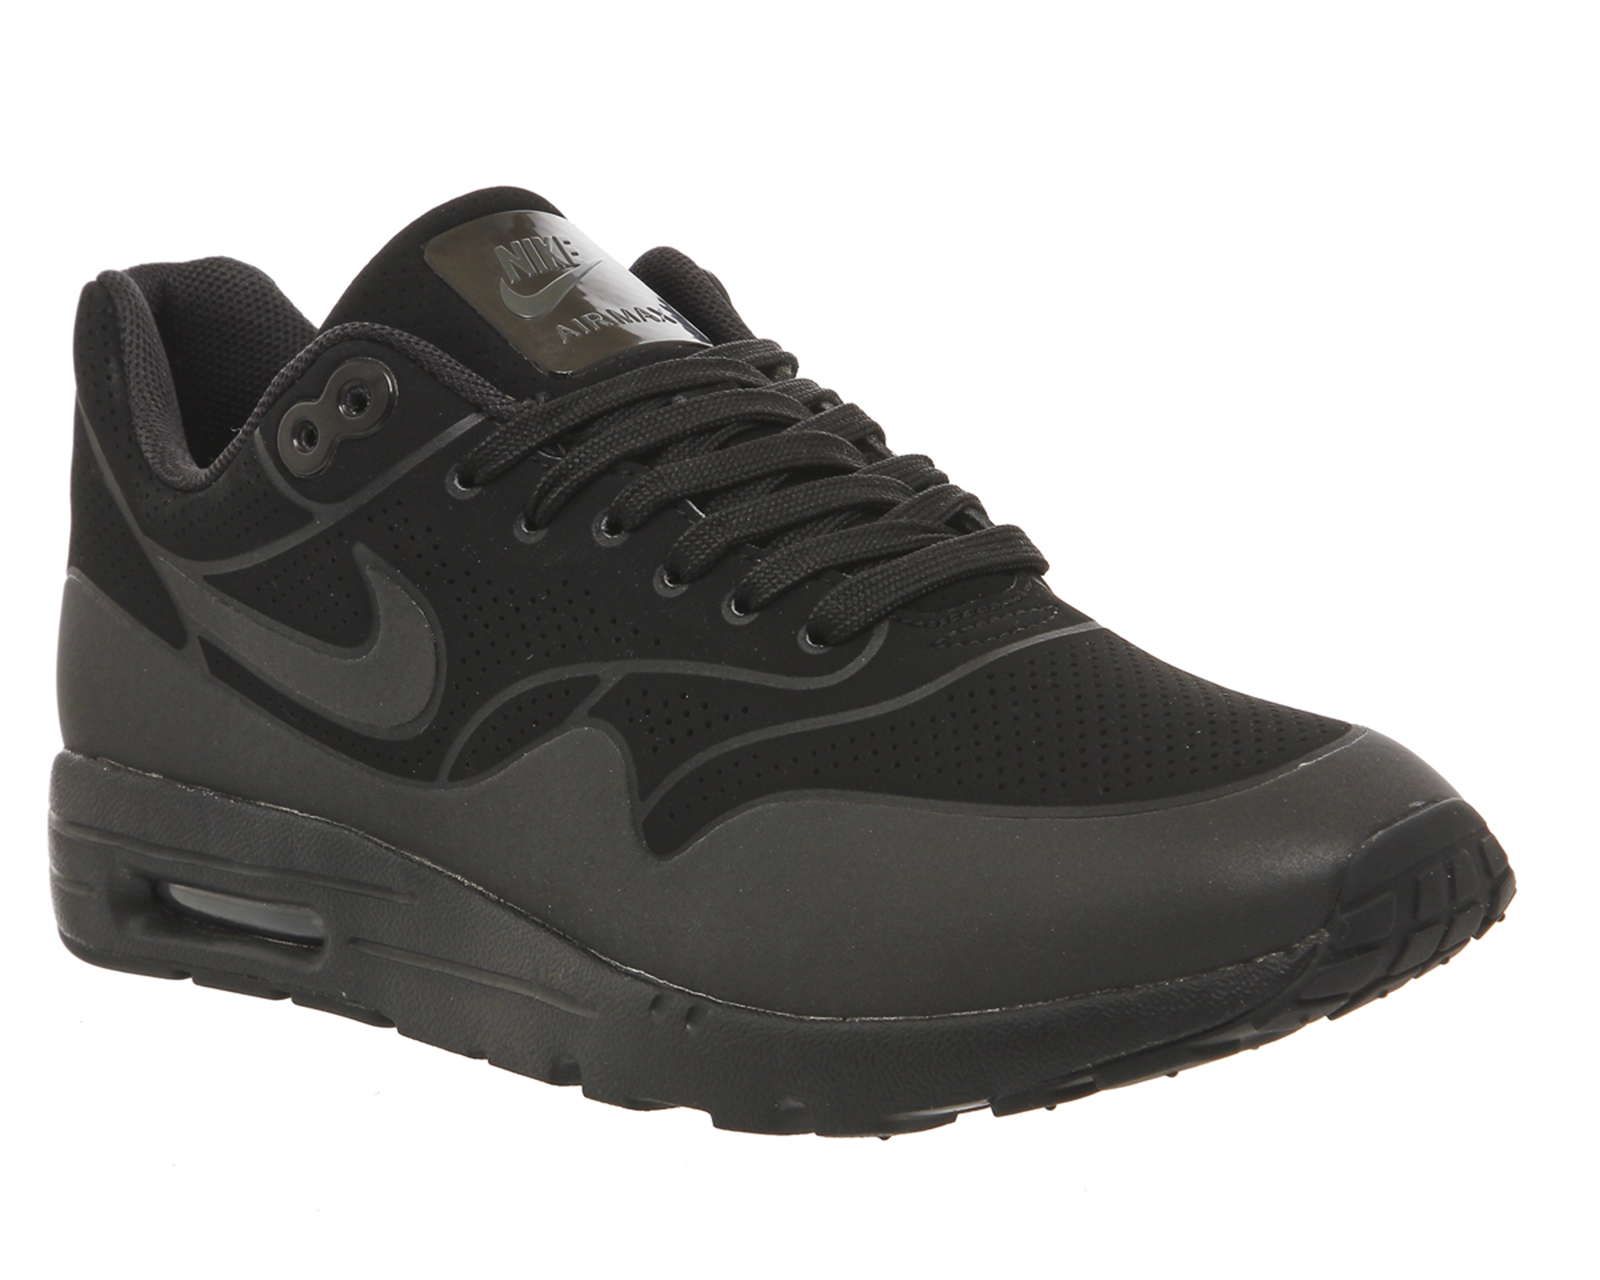 Nike Air Max 1 Ultra Moire (l) Black Black Anthracite - Hers trainers